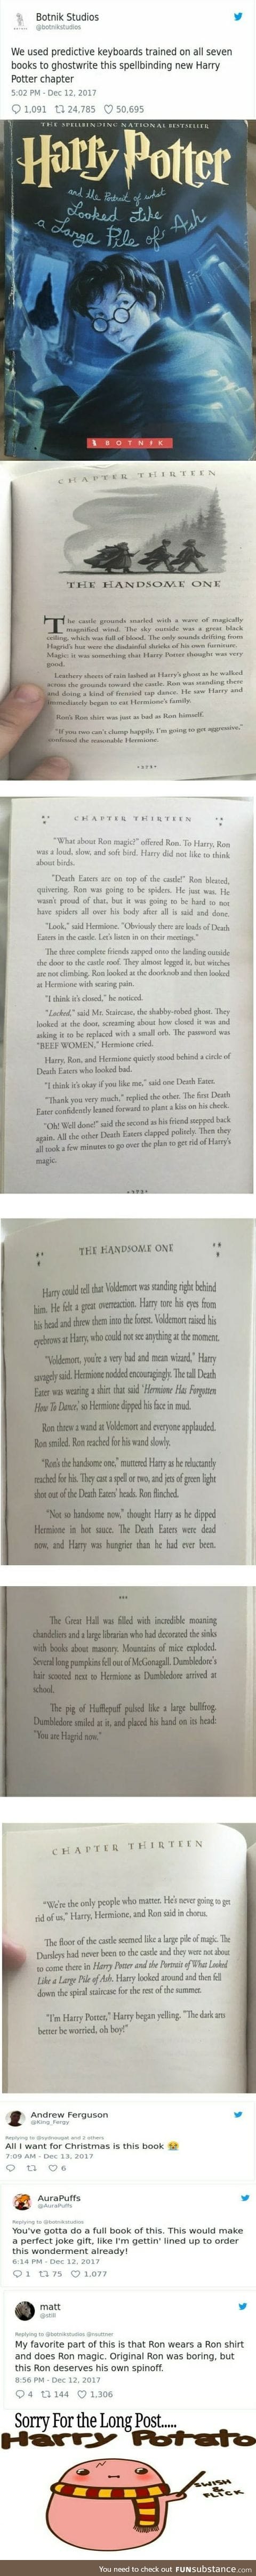 Not mine-saw it on 9gag : an AI that has read all the Harry Potter books writes a chapter.